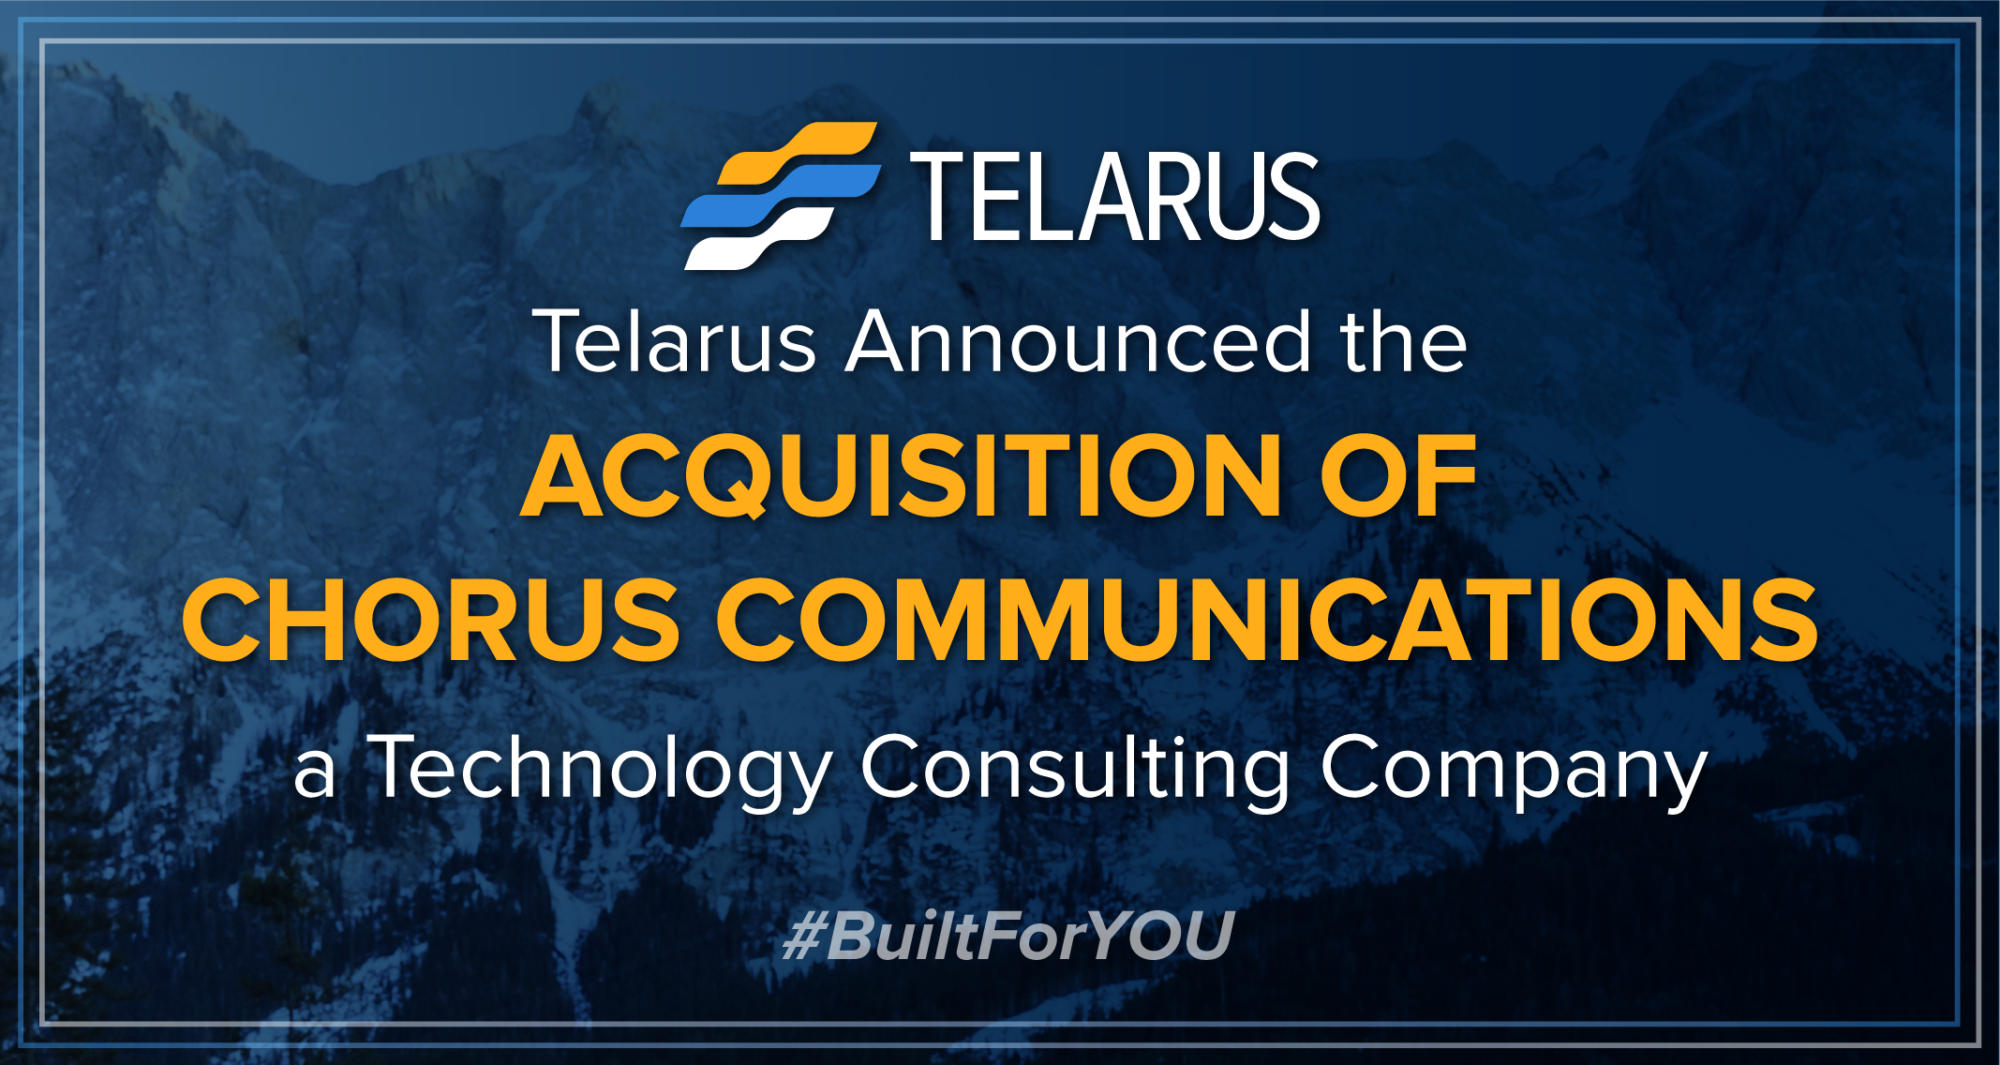 Acquisition of Chorus Communications, a Technology Consulting Company